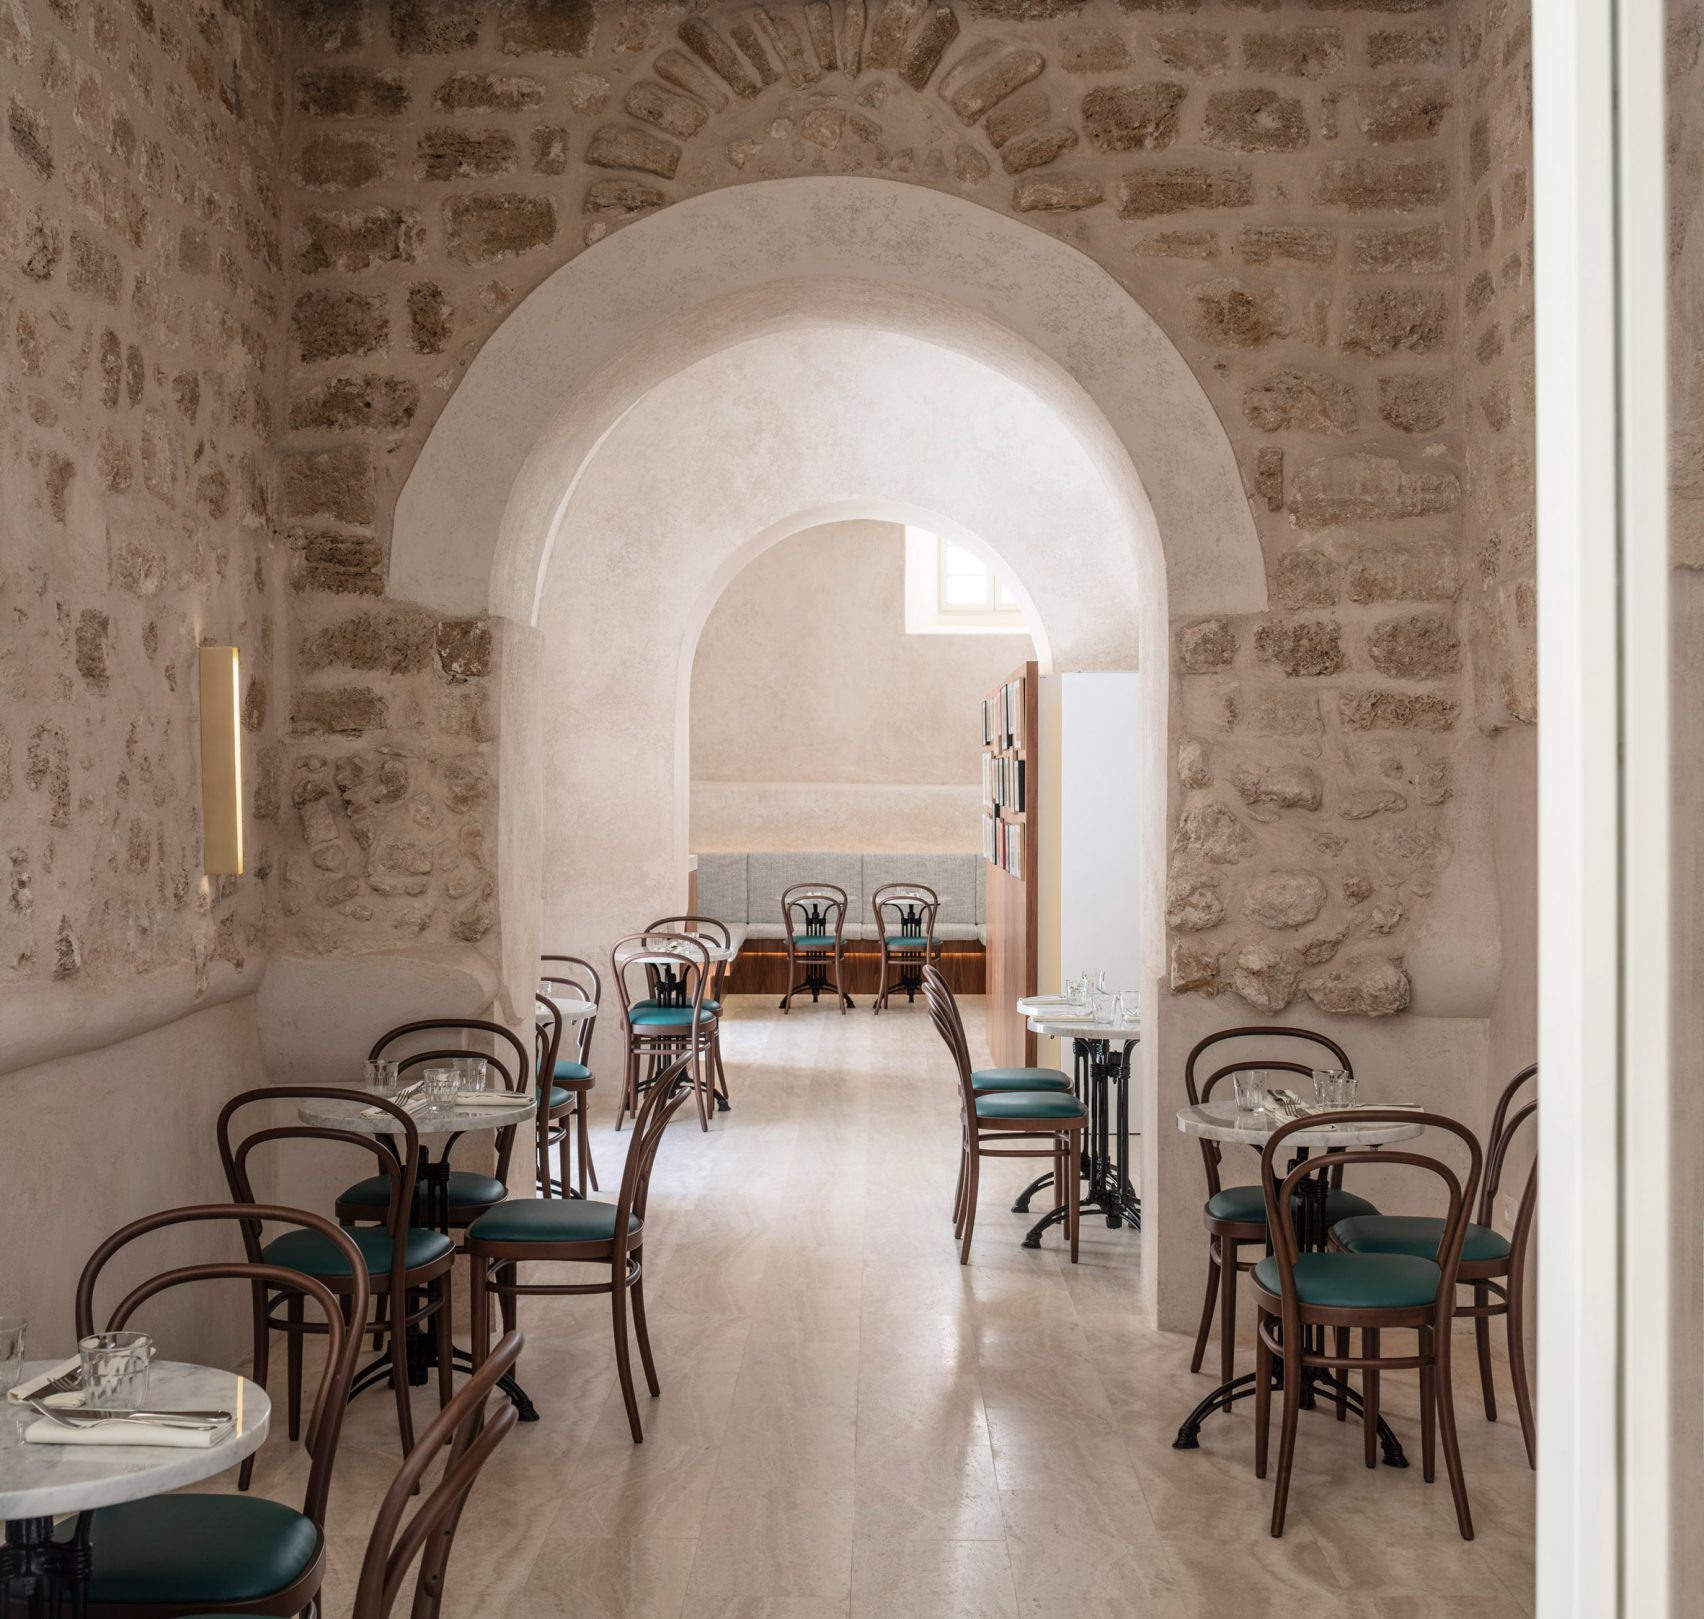 A lounge area inside one of the Jaffa's many archways